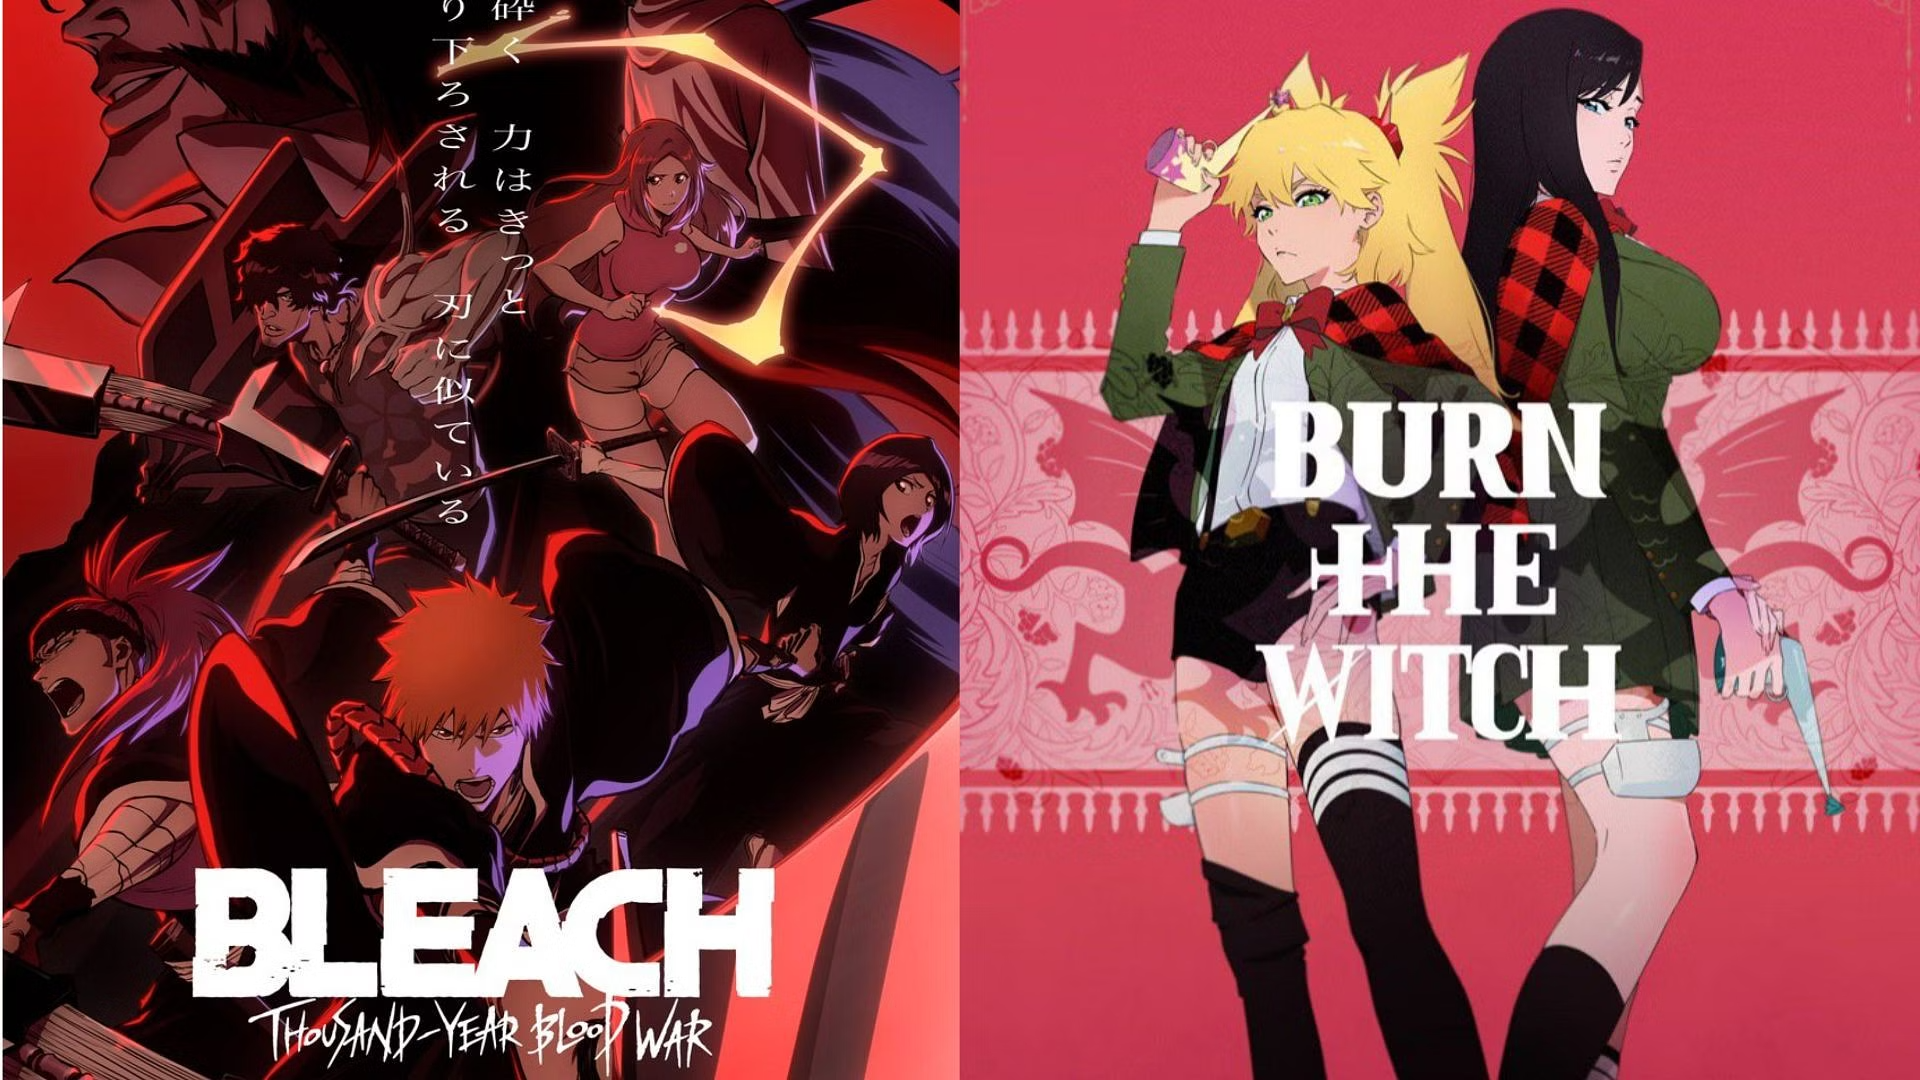 Bleach and Burn the Witch have new releases in May